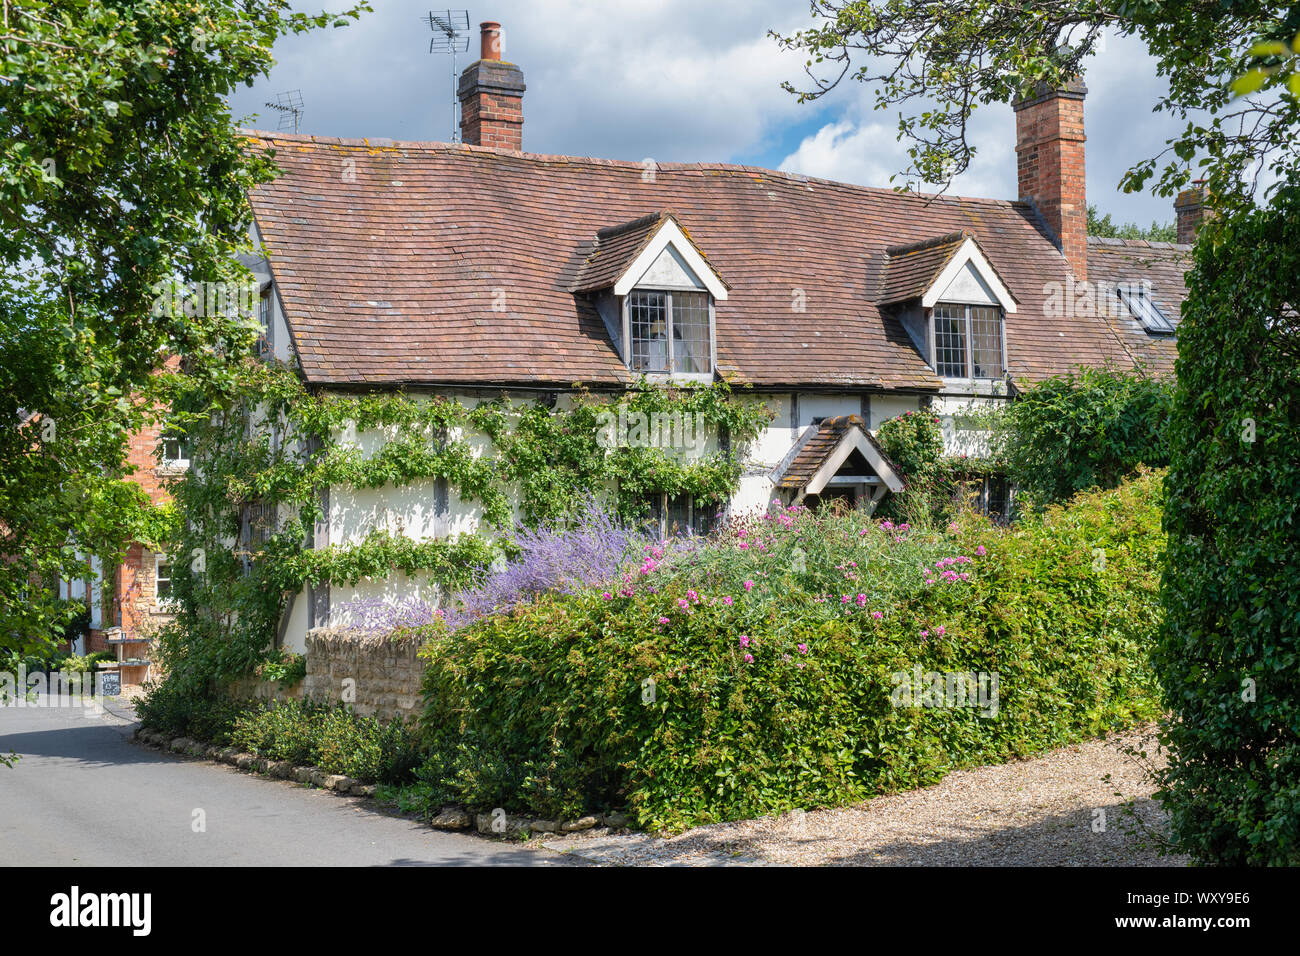 Timber framed cottage and front garden. Little Comberton, Cotswolds, Wychavon district, Worcestershire, UK Stock Photo